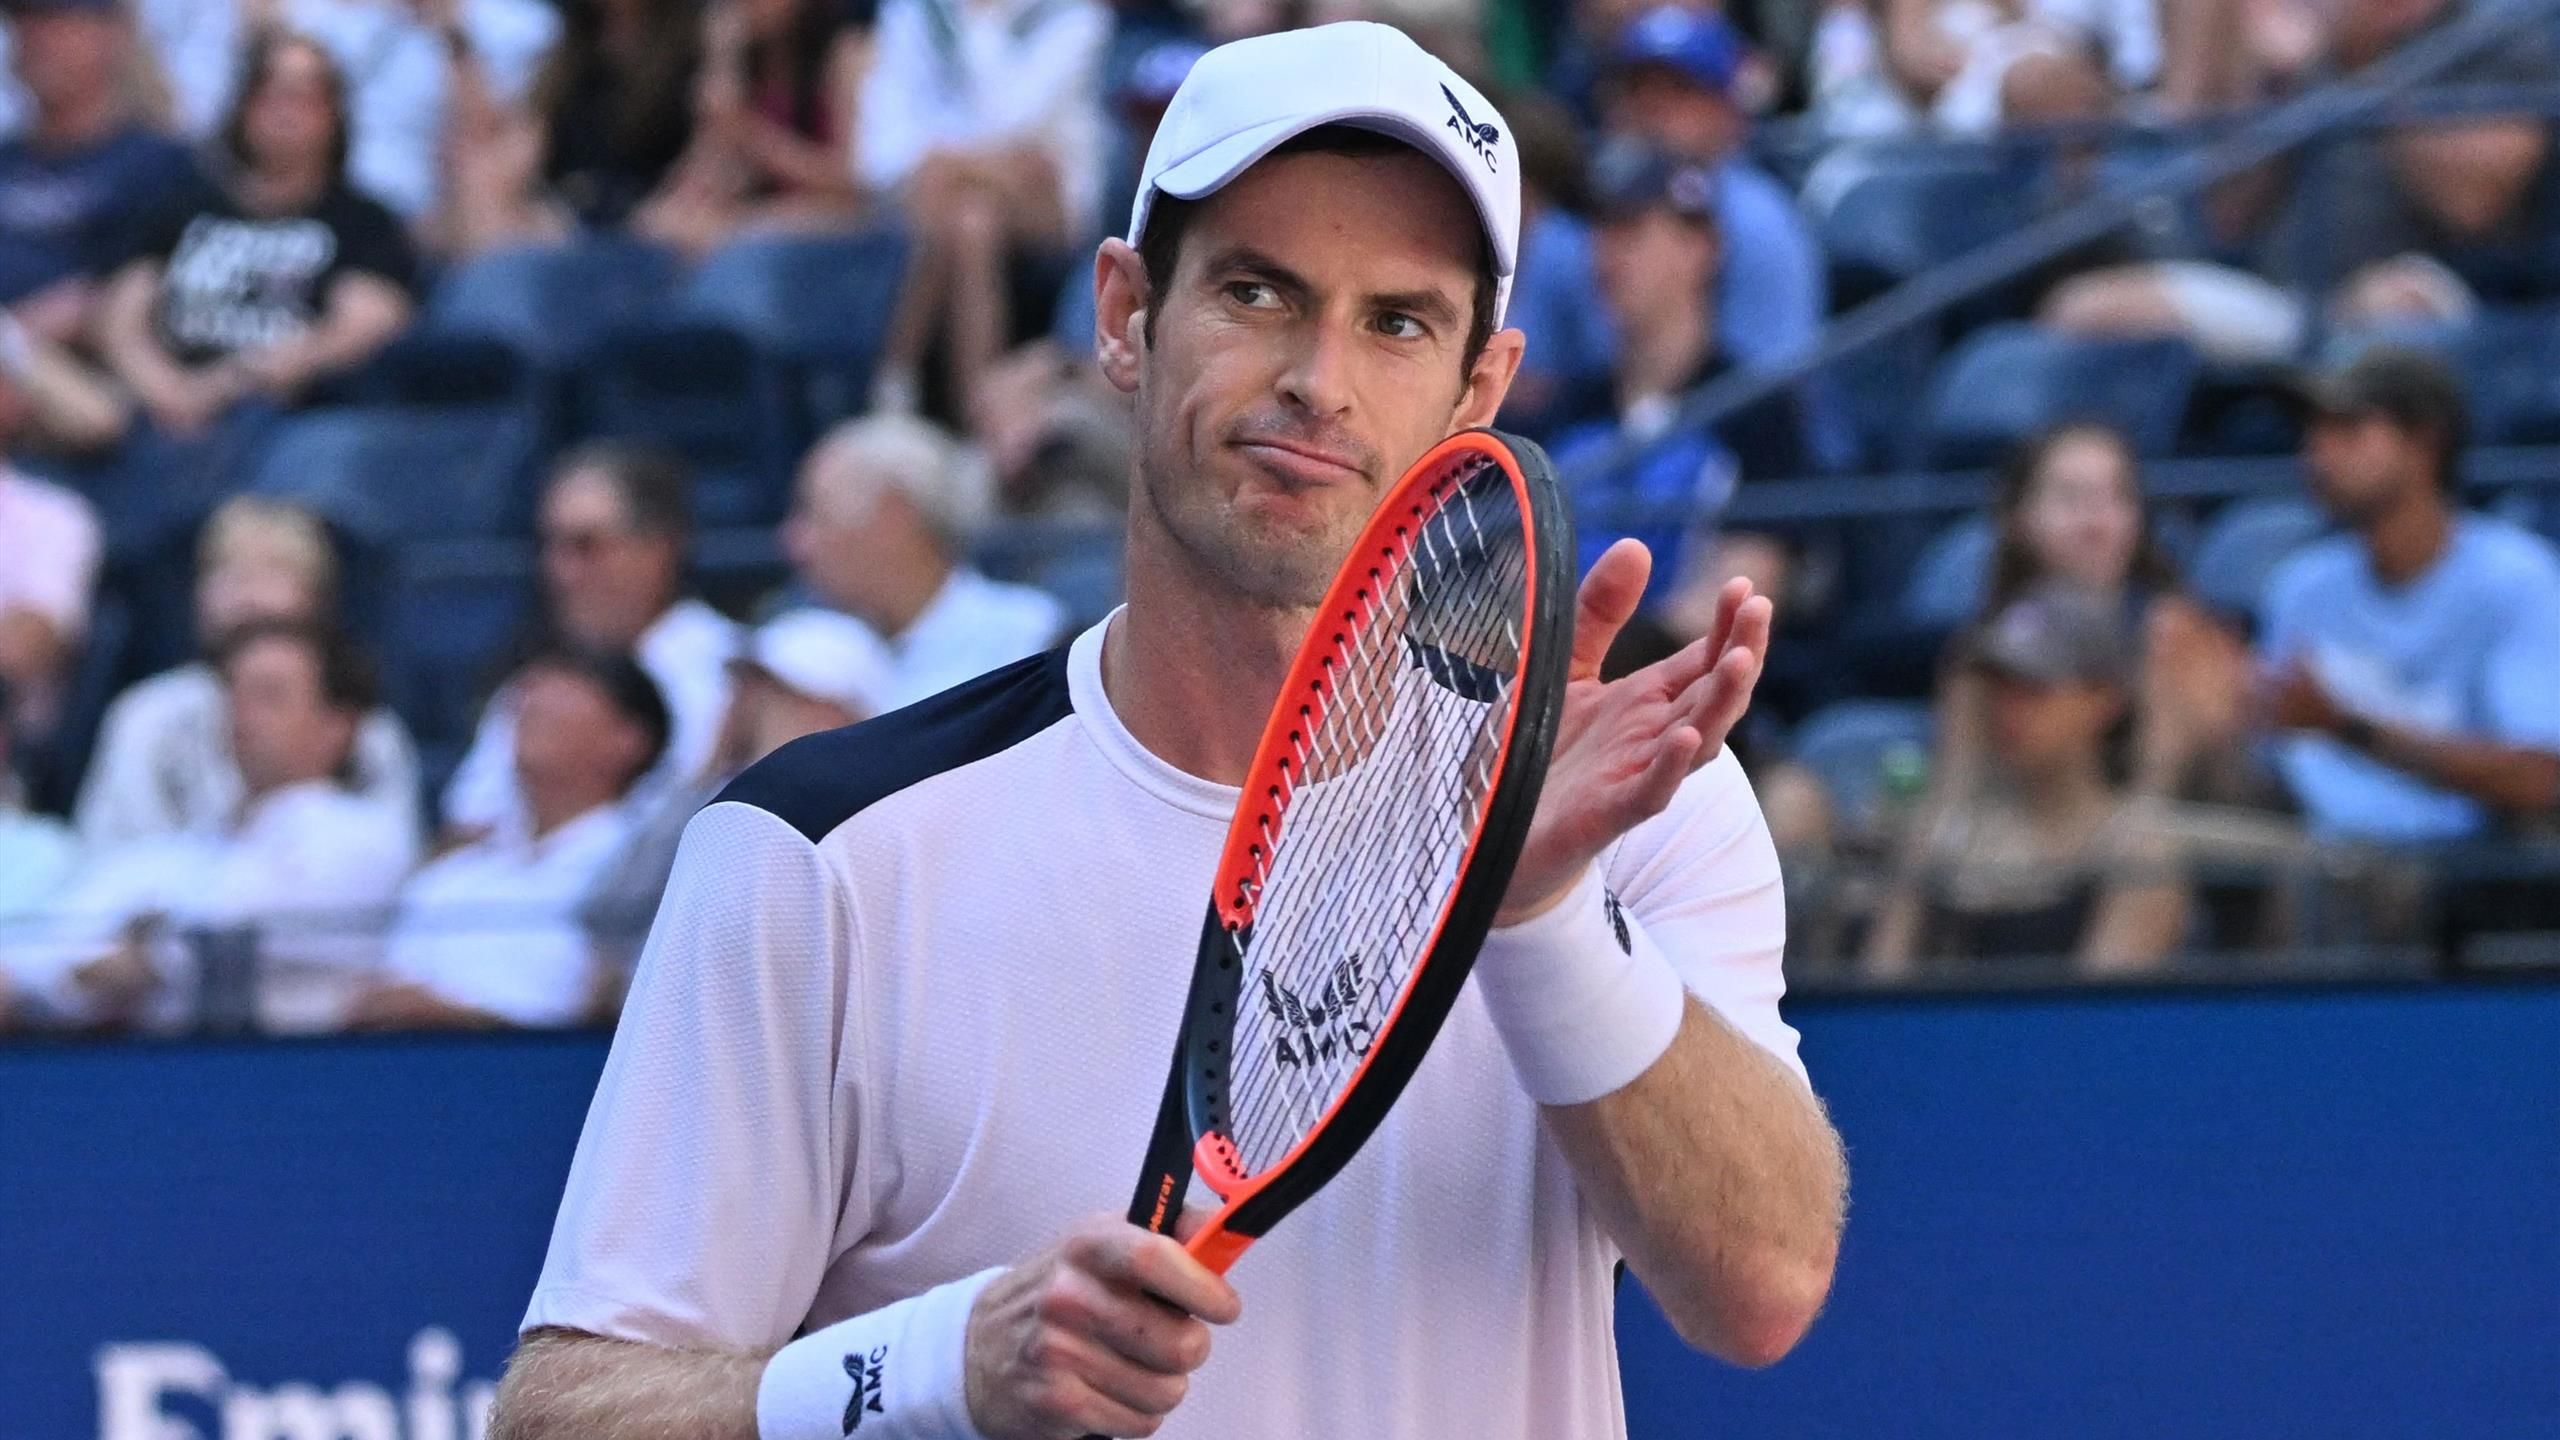 Andy Murray falls to Grigor Dimitrov at US Open despite winning wild point on opponents side of the net